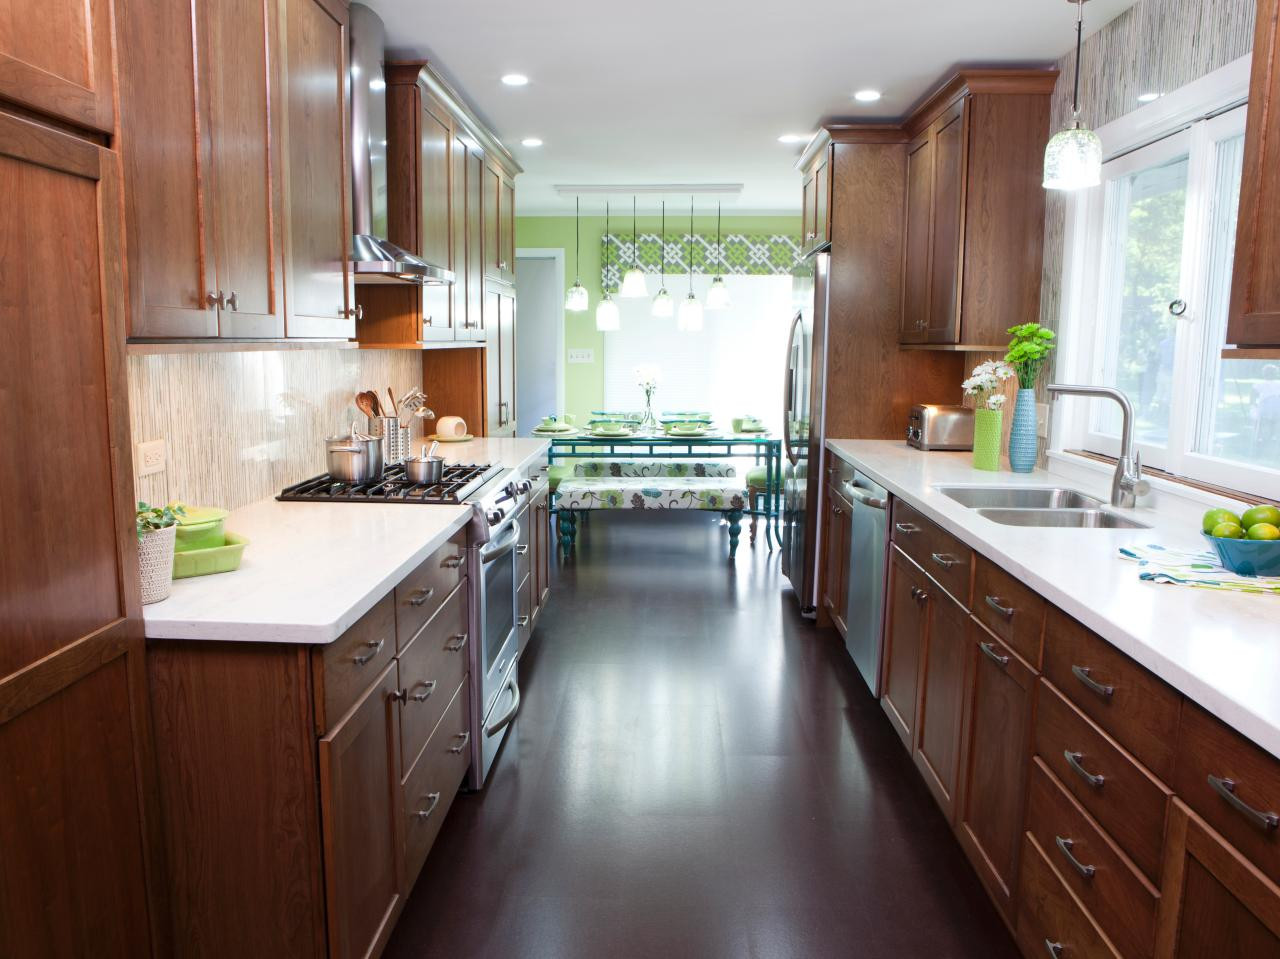 Remodeling Galley Kitchen
 Galley Kitchen Ideas Steps to Plan to Set up Galley